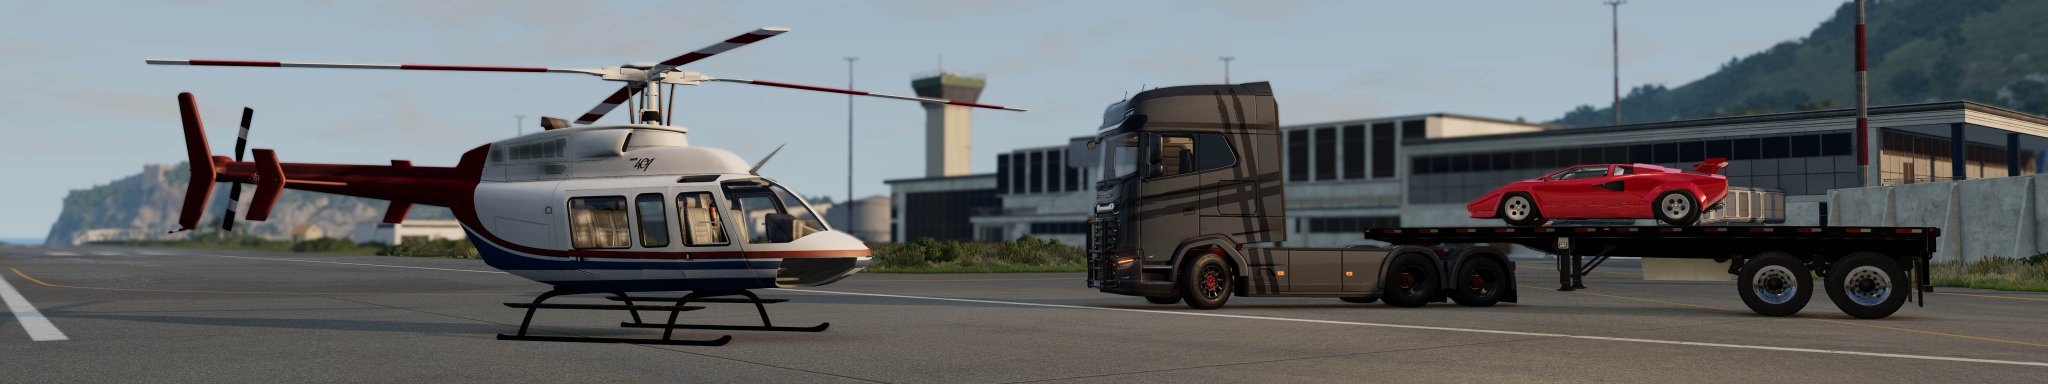 00 BeamNG HELICOPTOR at ITALY AIRPORT with LAMBO COUNTACH copy.jpg